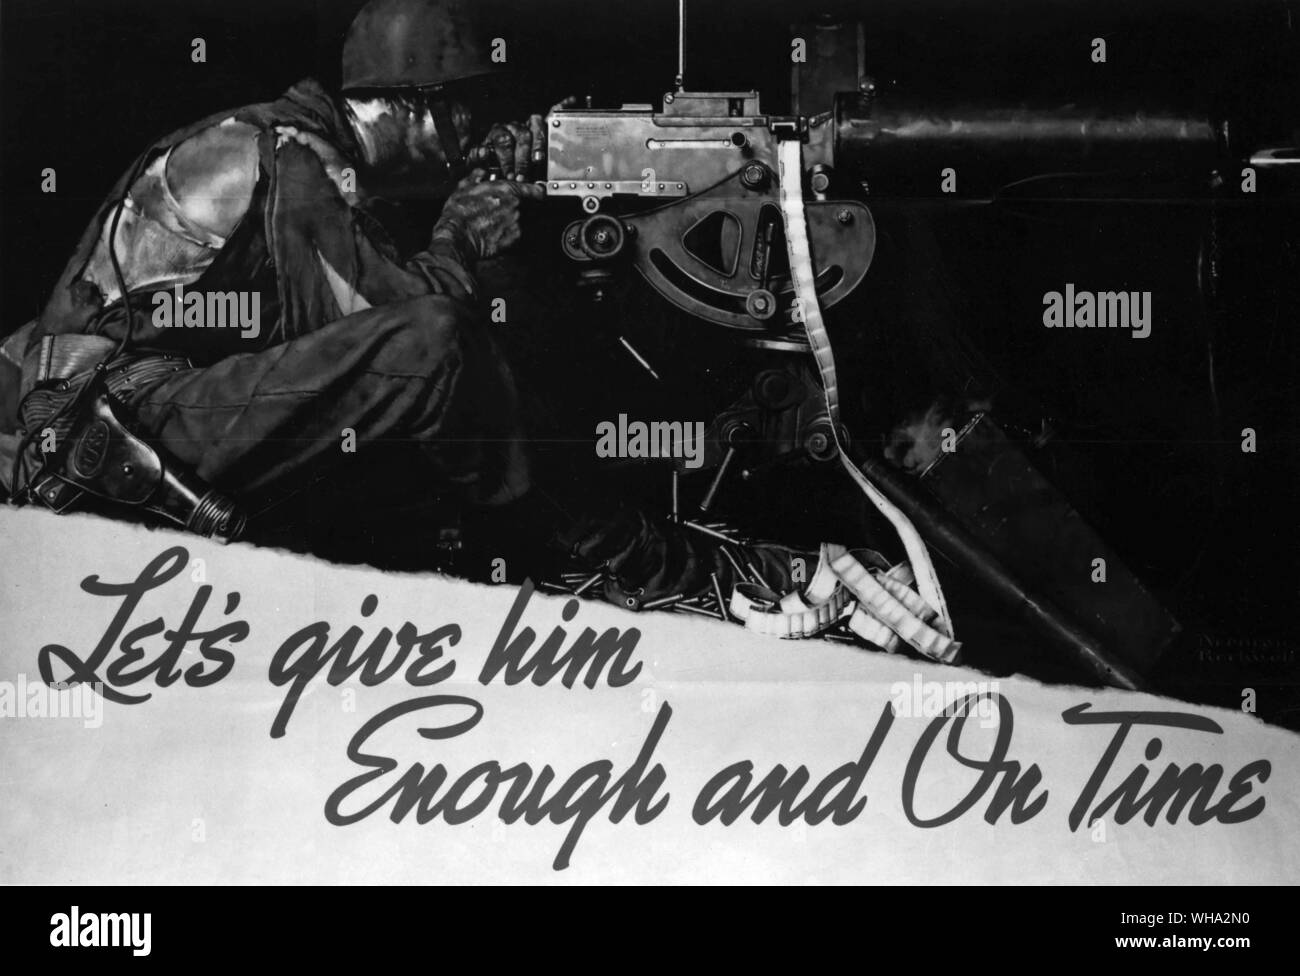 WW2: 'Let's give him enough and on time'. US war poster. Stock Photo